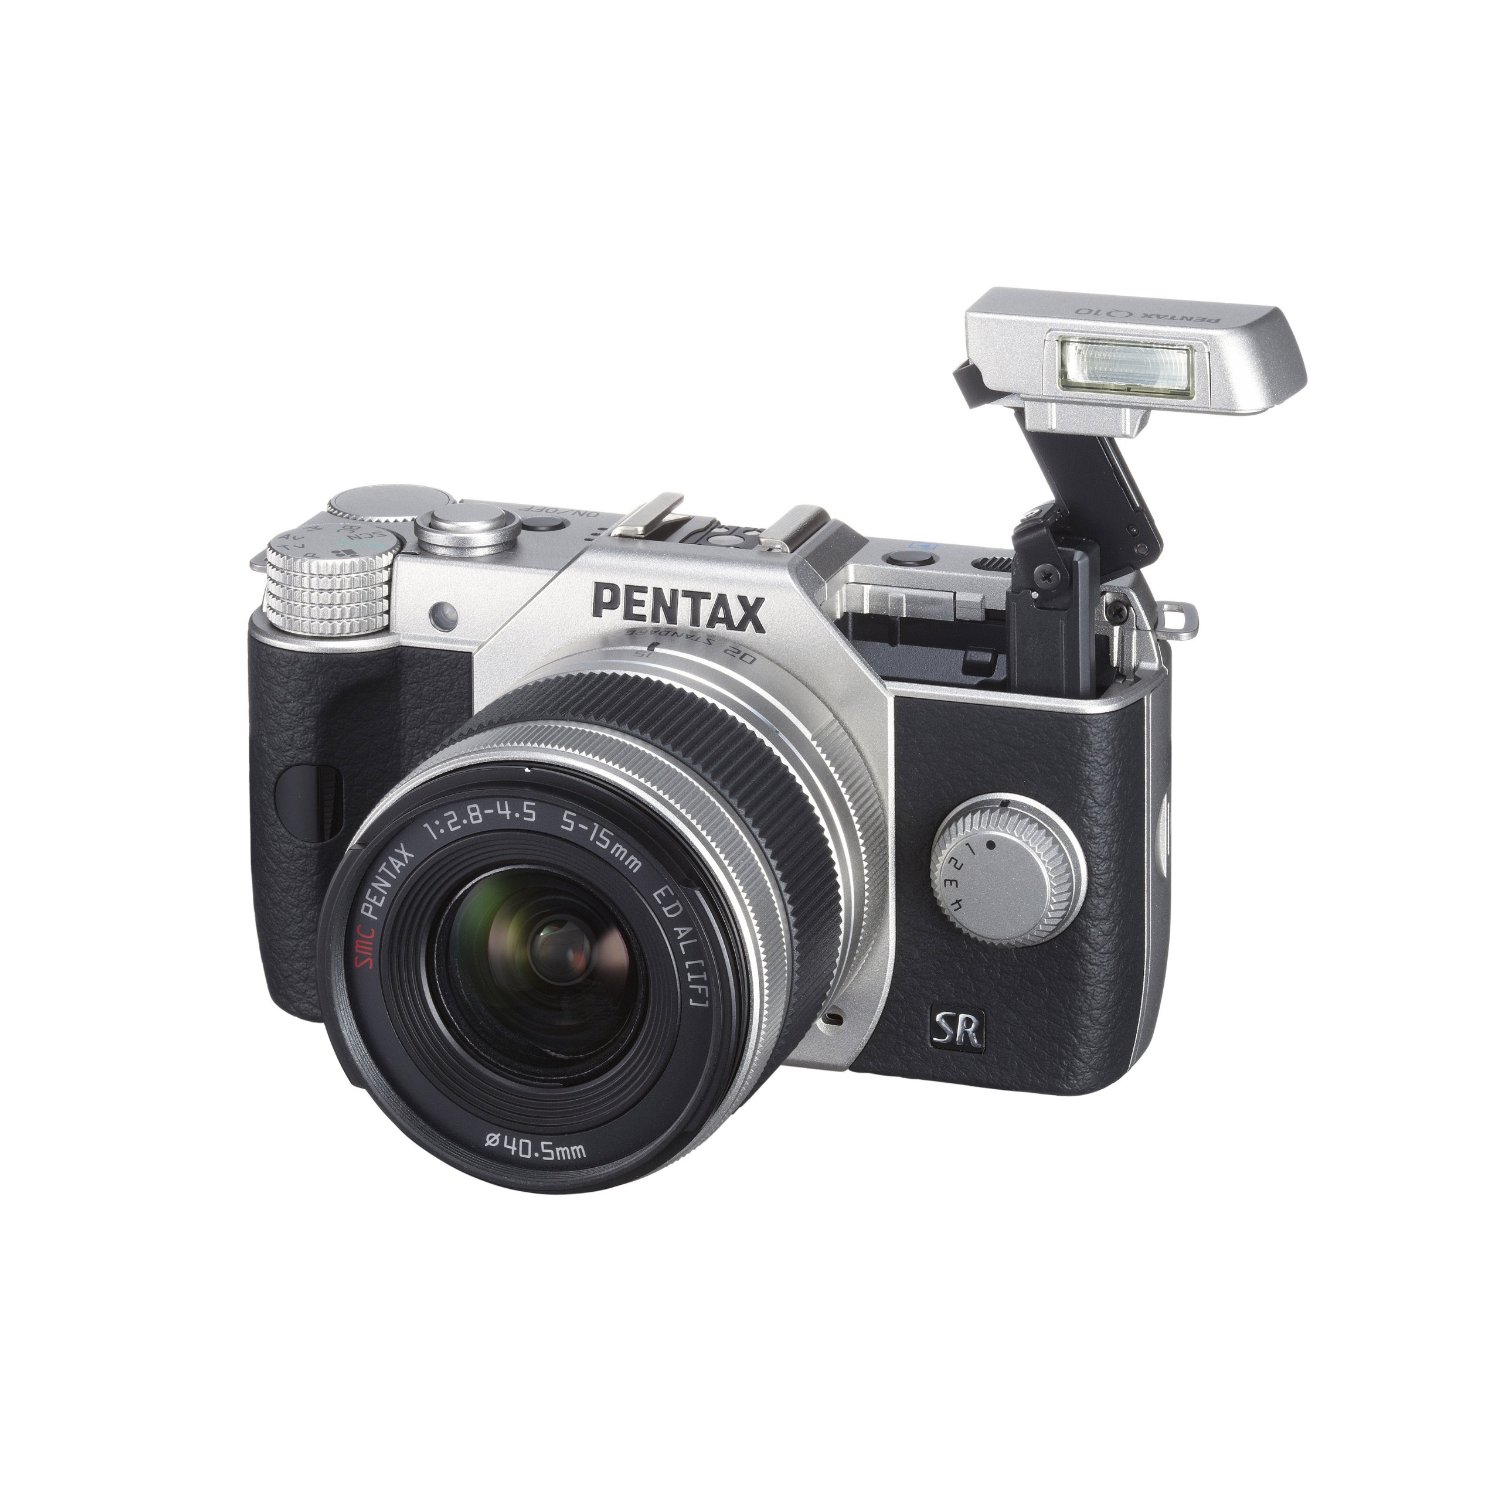 http://thetechjournal.com/wp-content/uploads/images/1210/1350236866-pentax-brings-q10-124mp-compact-camera-5.jpg